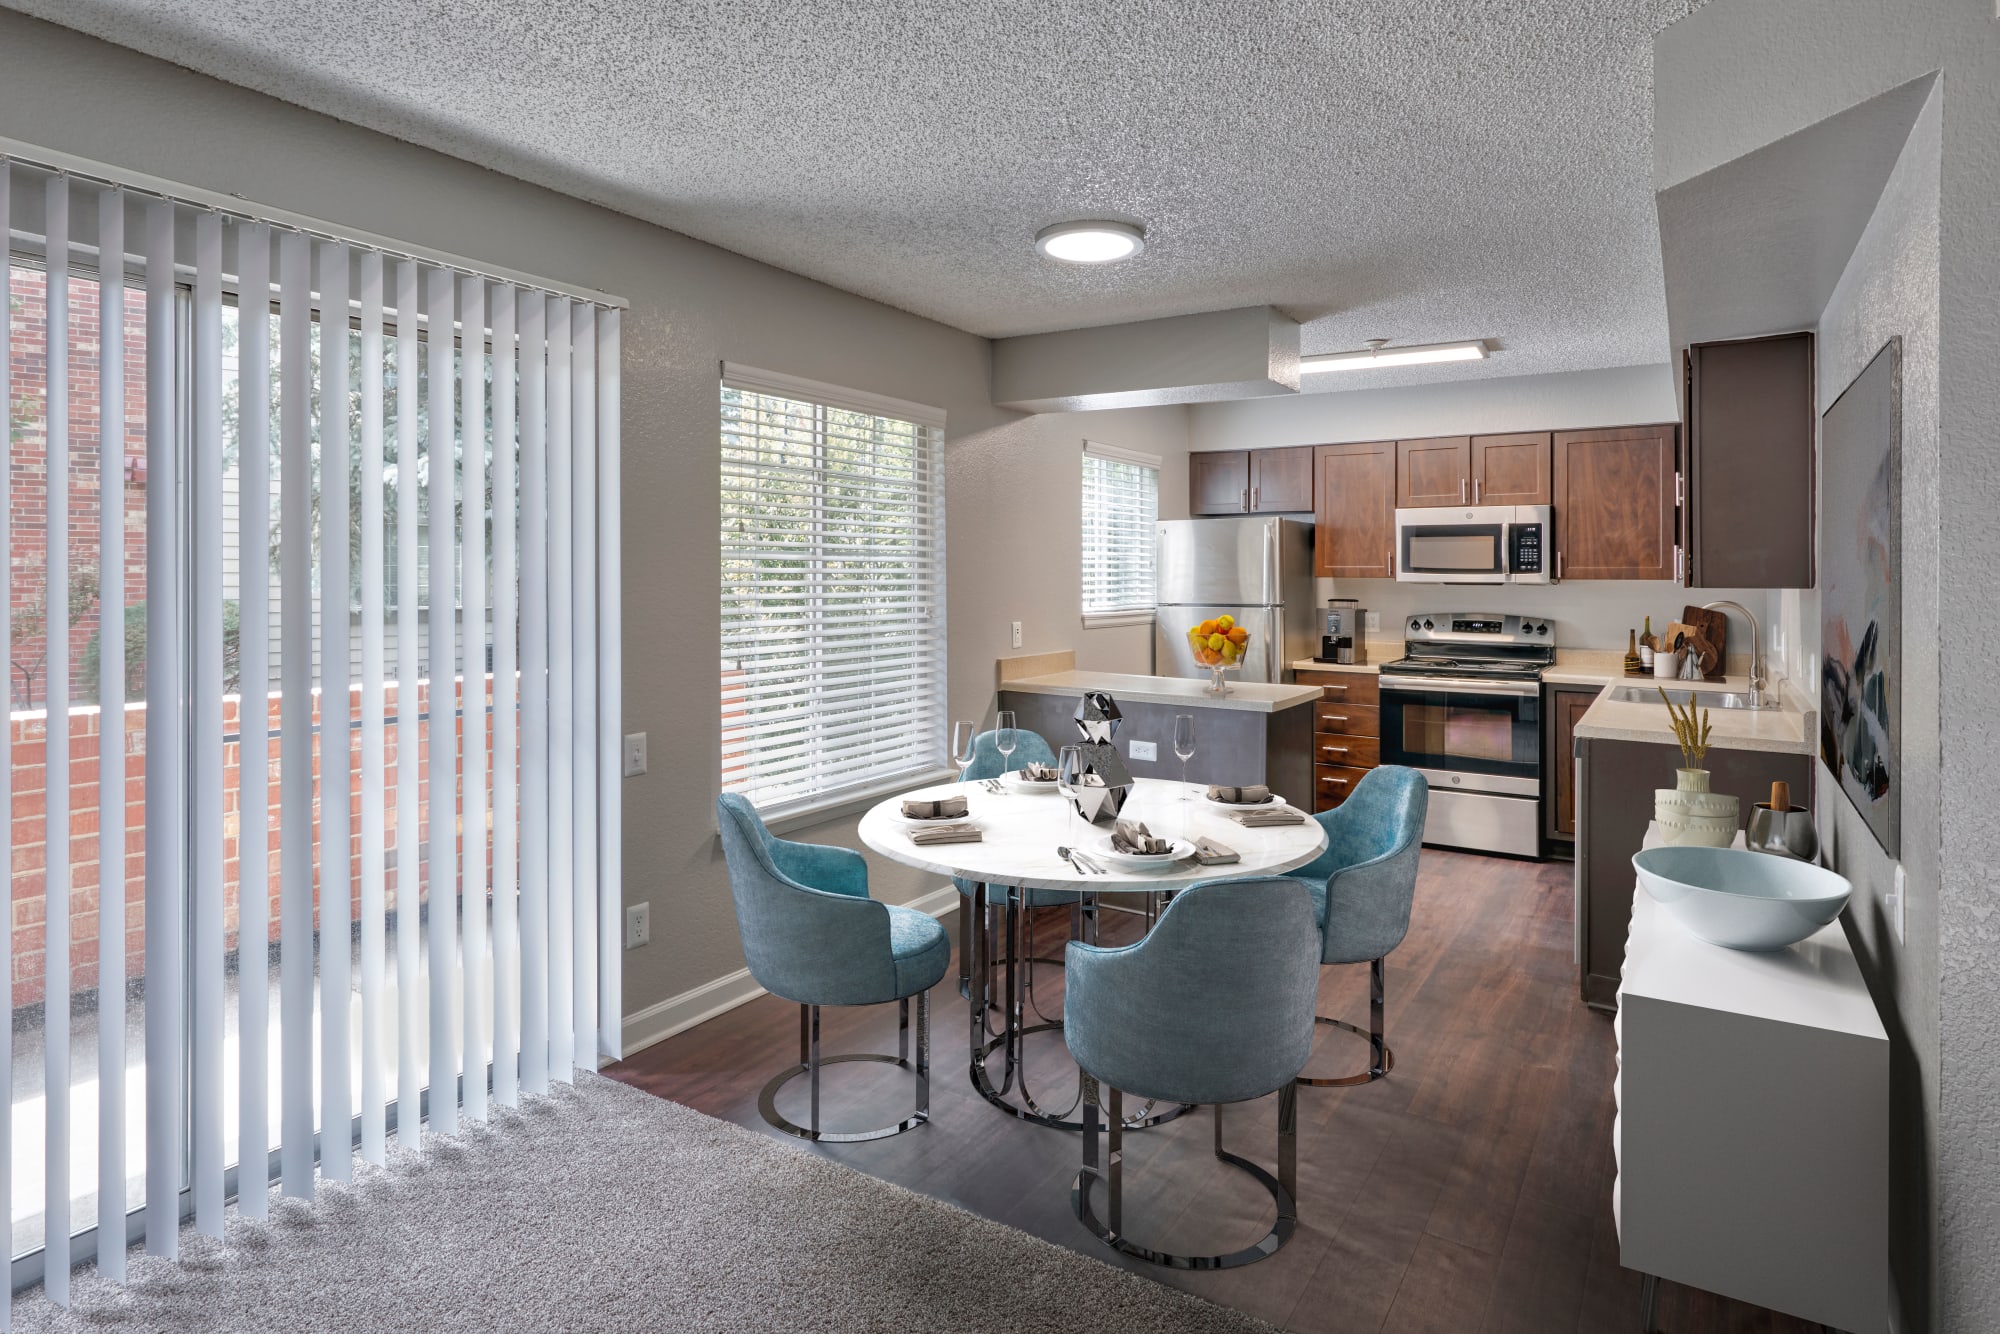 Kitchen overlooking the dining room in an open floor plan at Arapahoe Club Apartments in Denver, Colorado